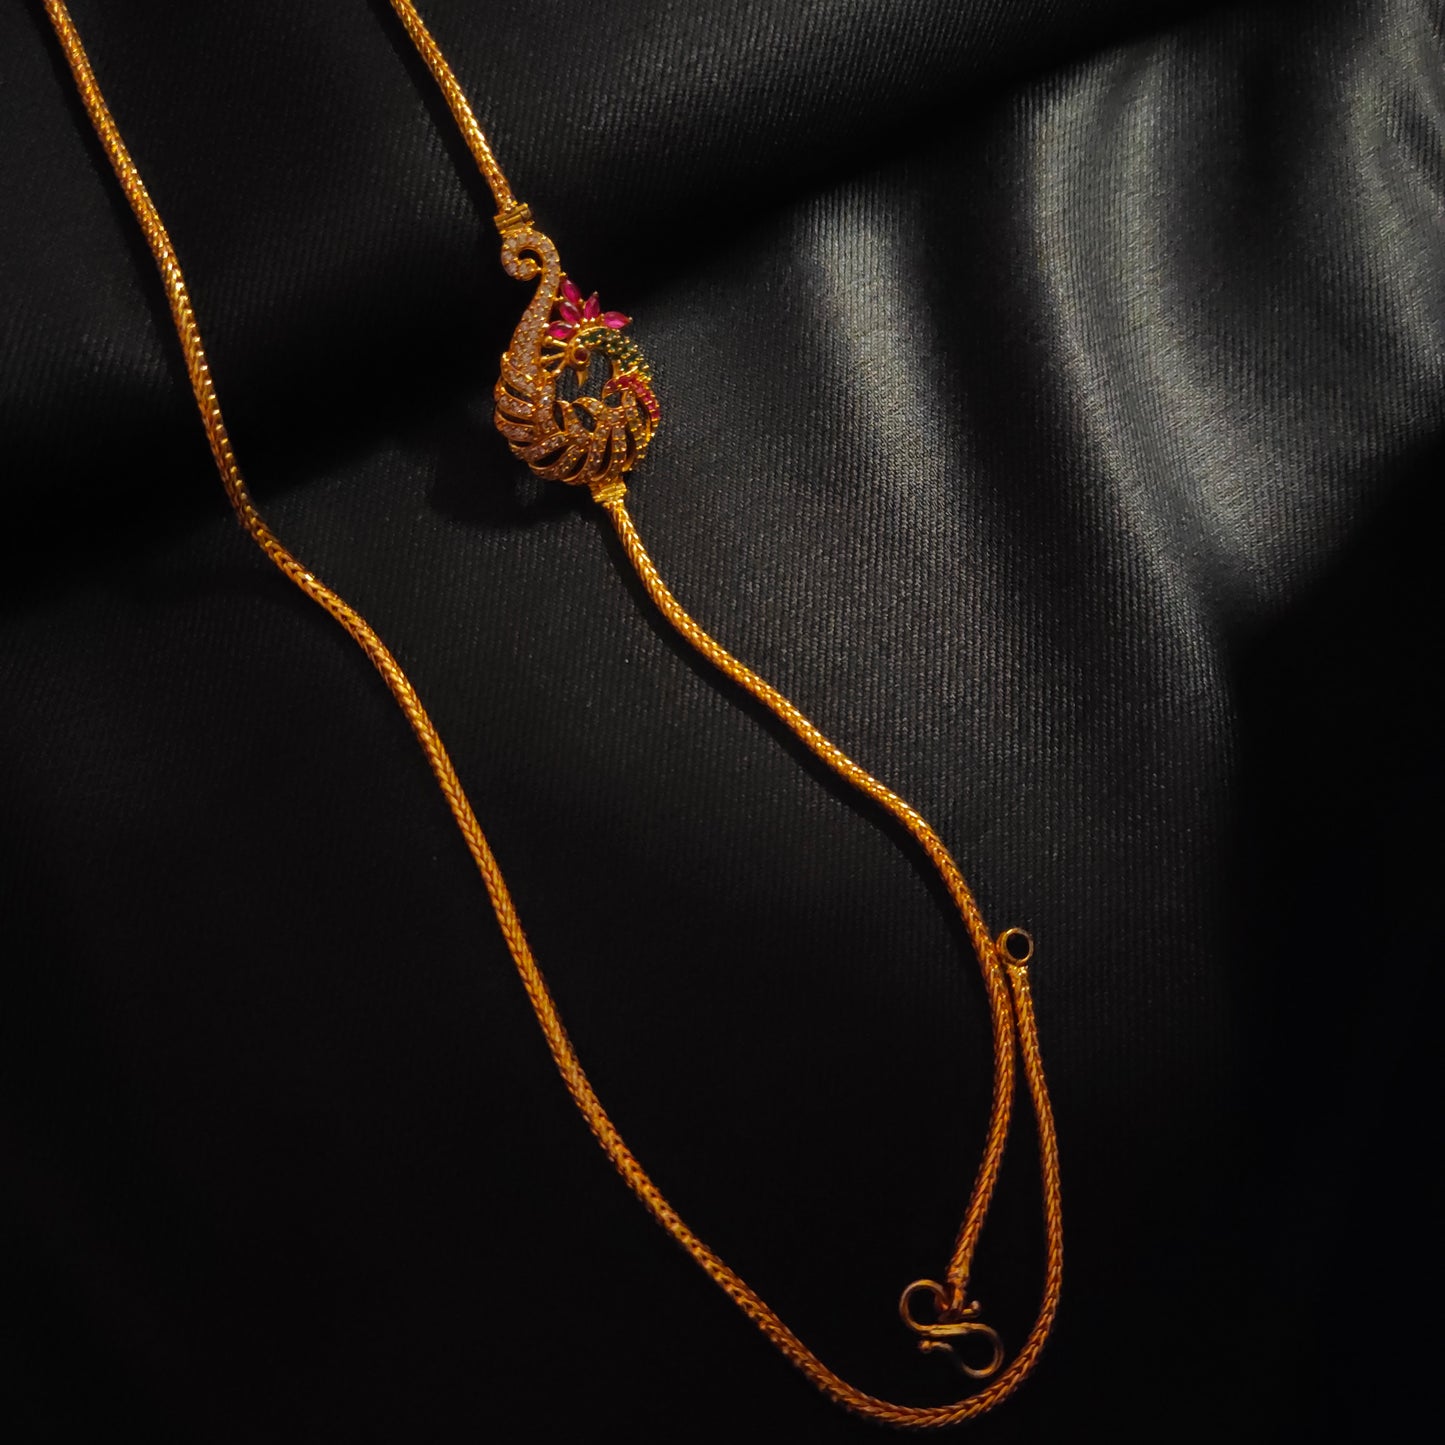 "Dazzle in Elegance: The Exquisite 24K Gold Plated CZ Mugappu Chain by ASP Fashion Jewellery"